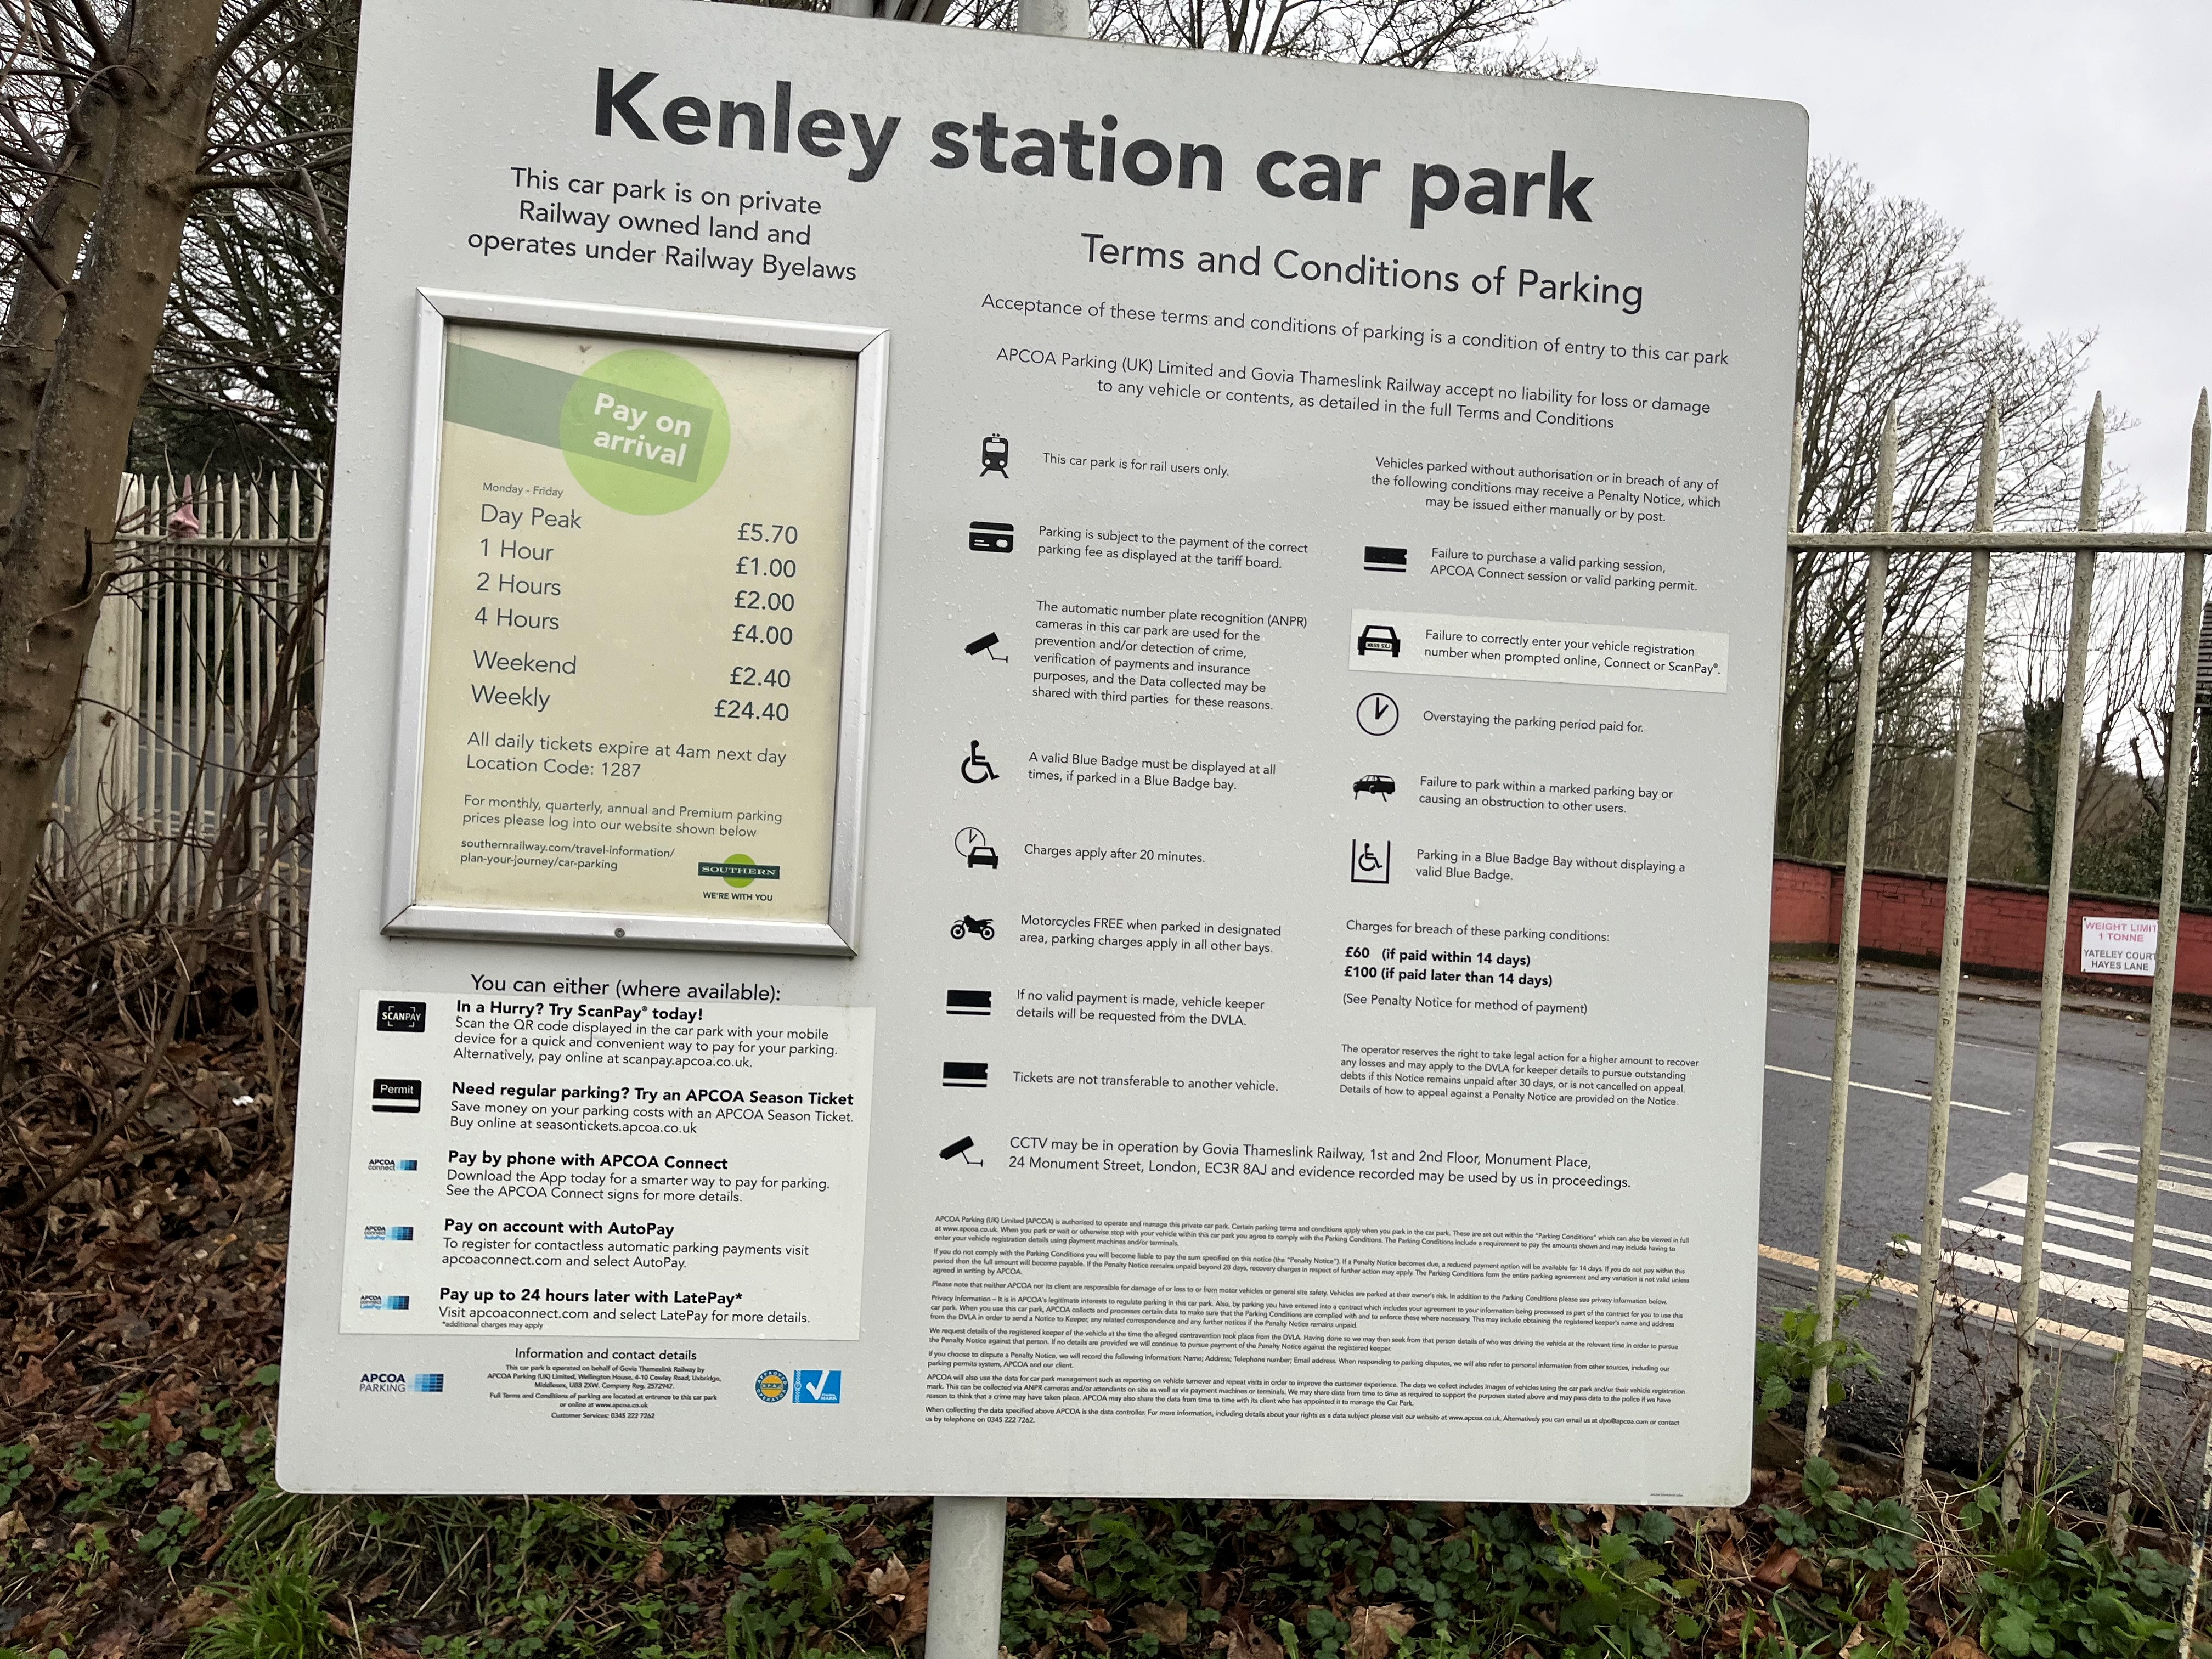 New parking rates at Kenley station